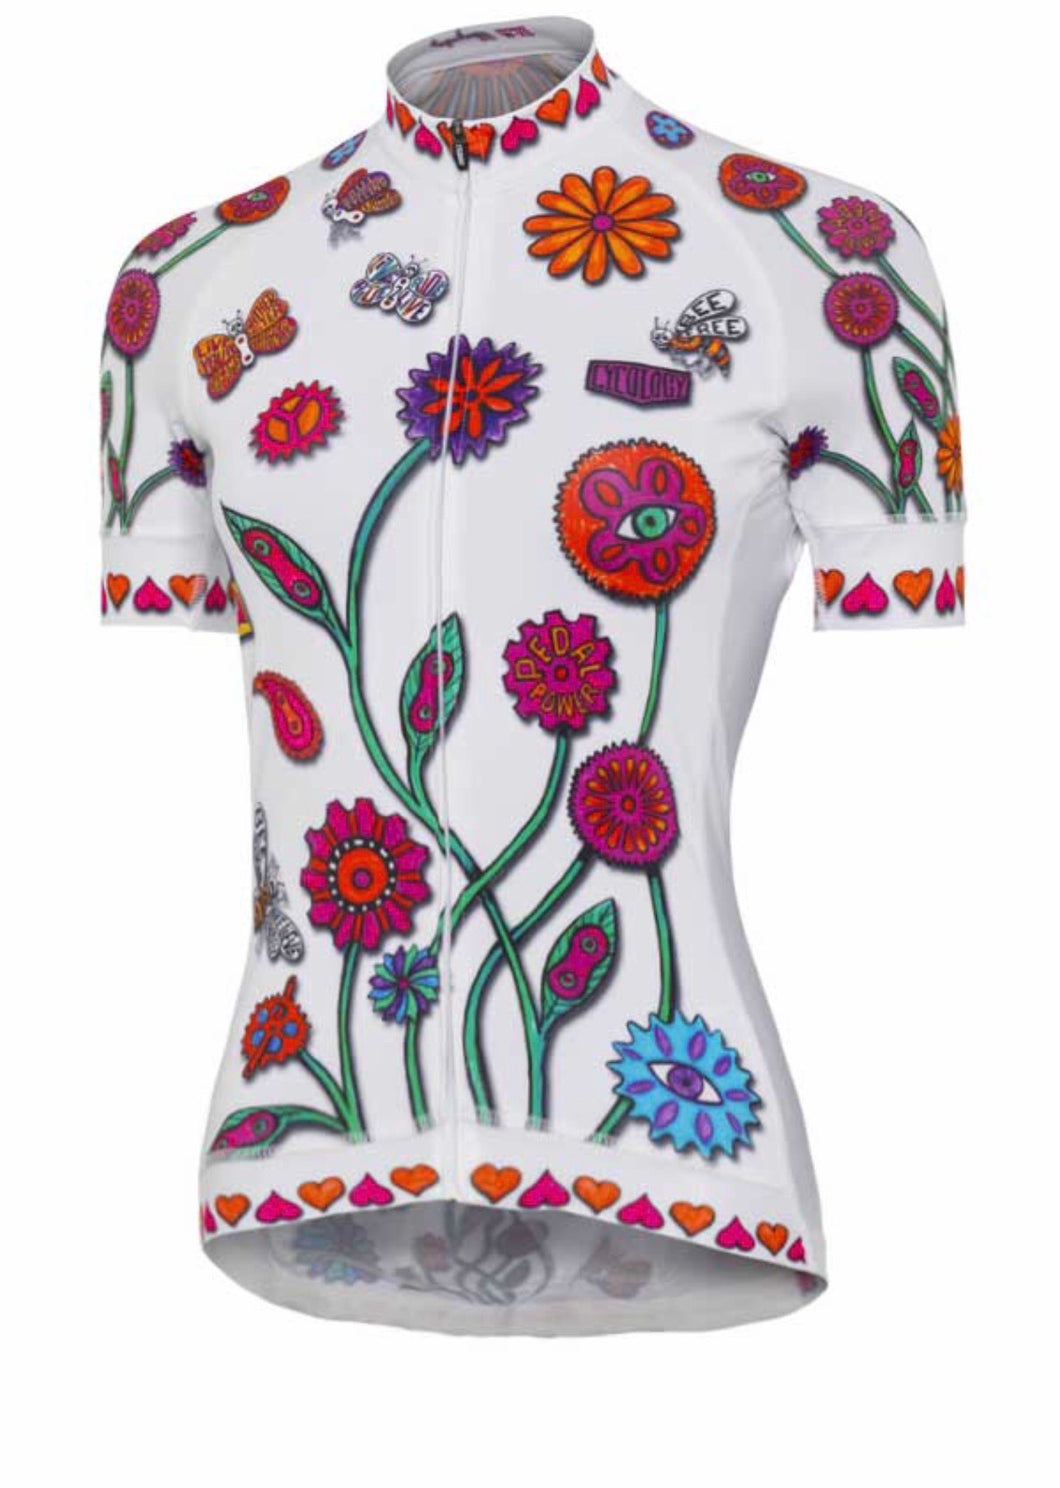 Women’s Cycology Short Sleeved Performance Cycle Jersey- Boho White